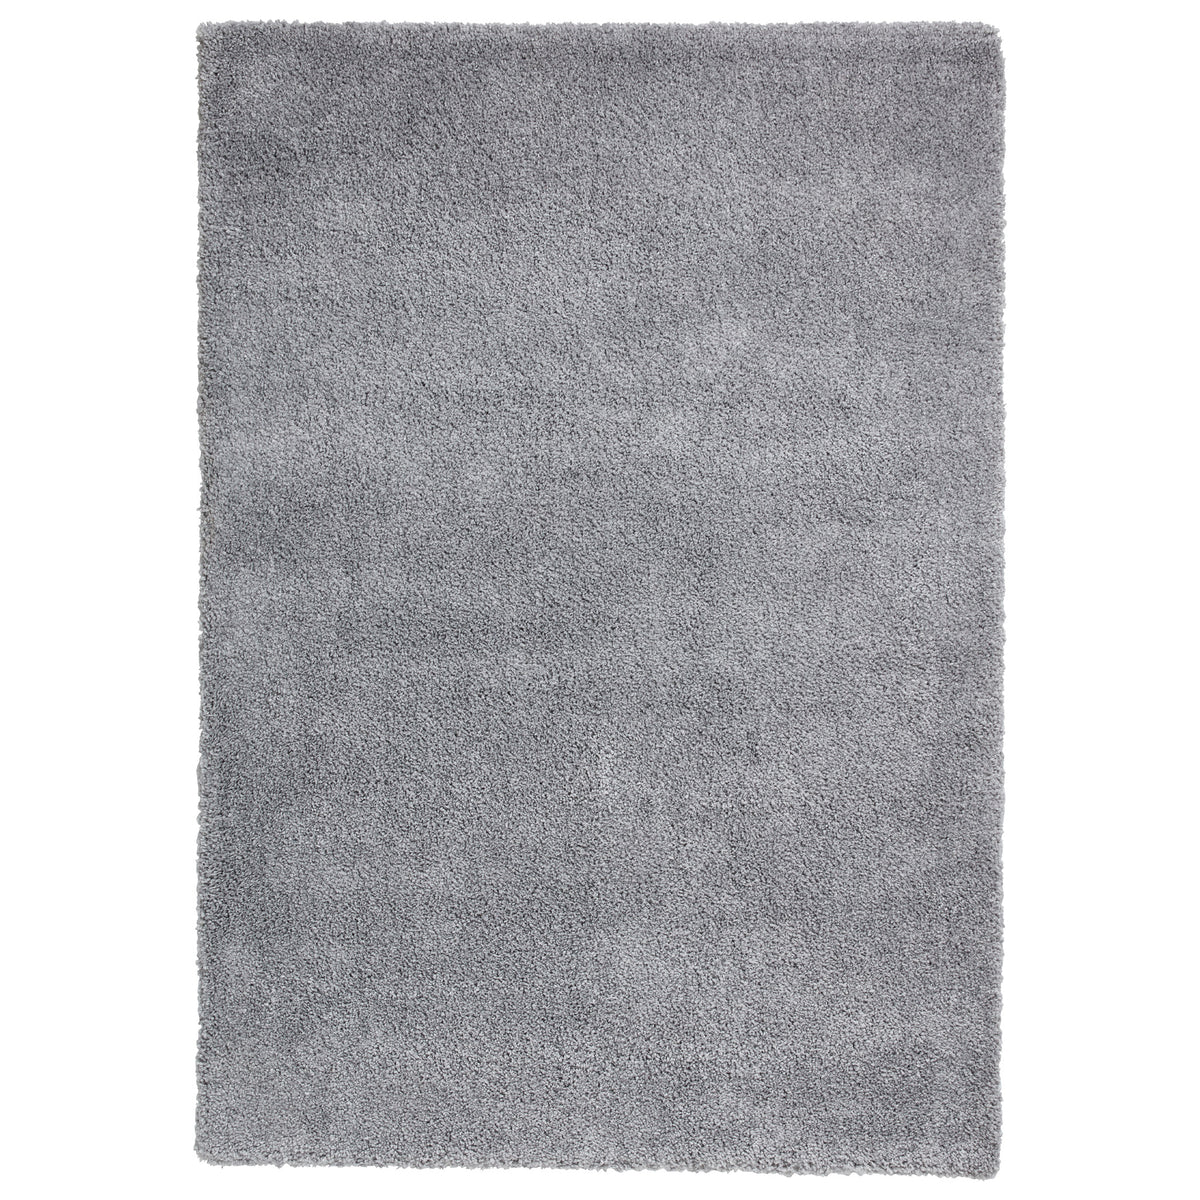 Roswell Grey Stain Resistant Shaggy Rug from Roseland Furniture